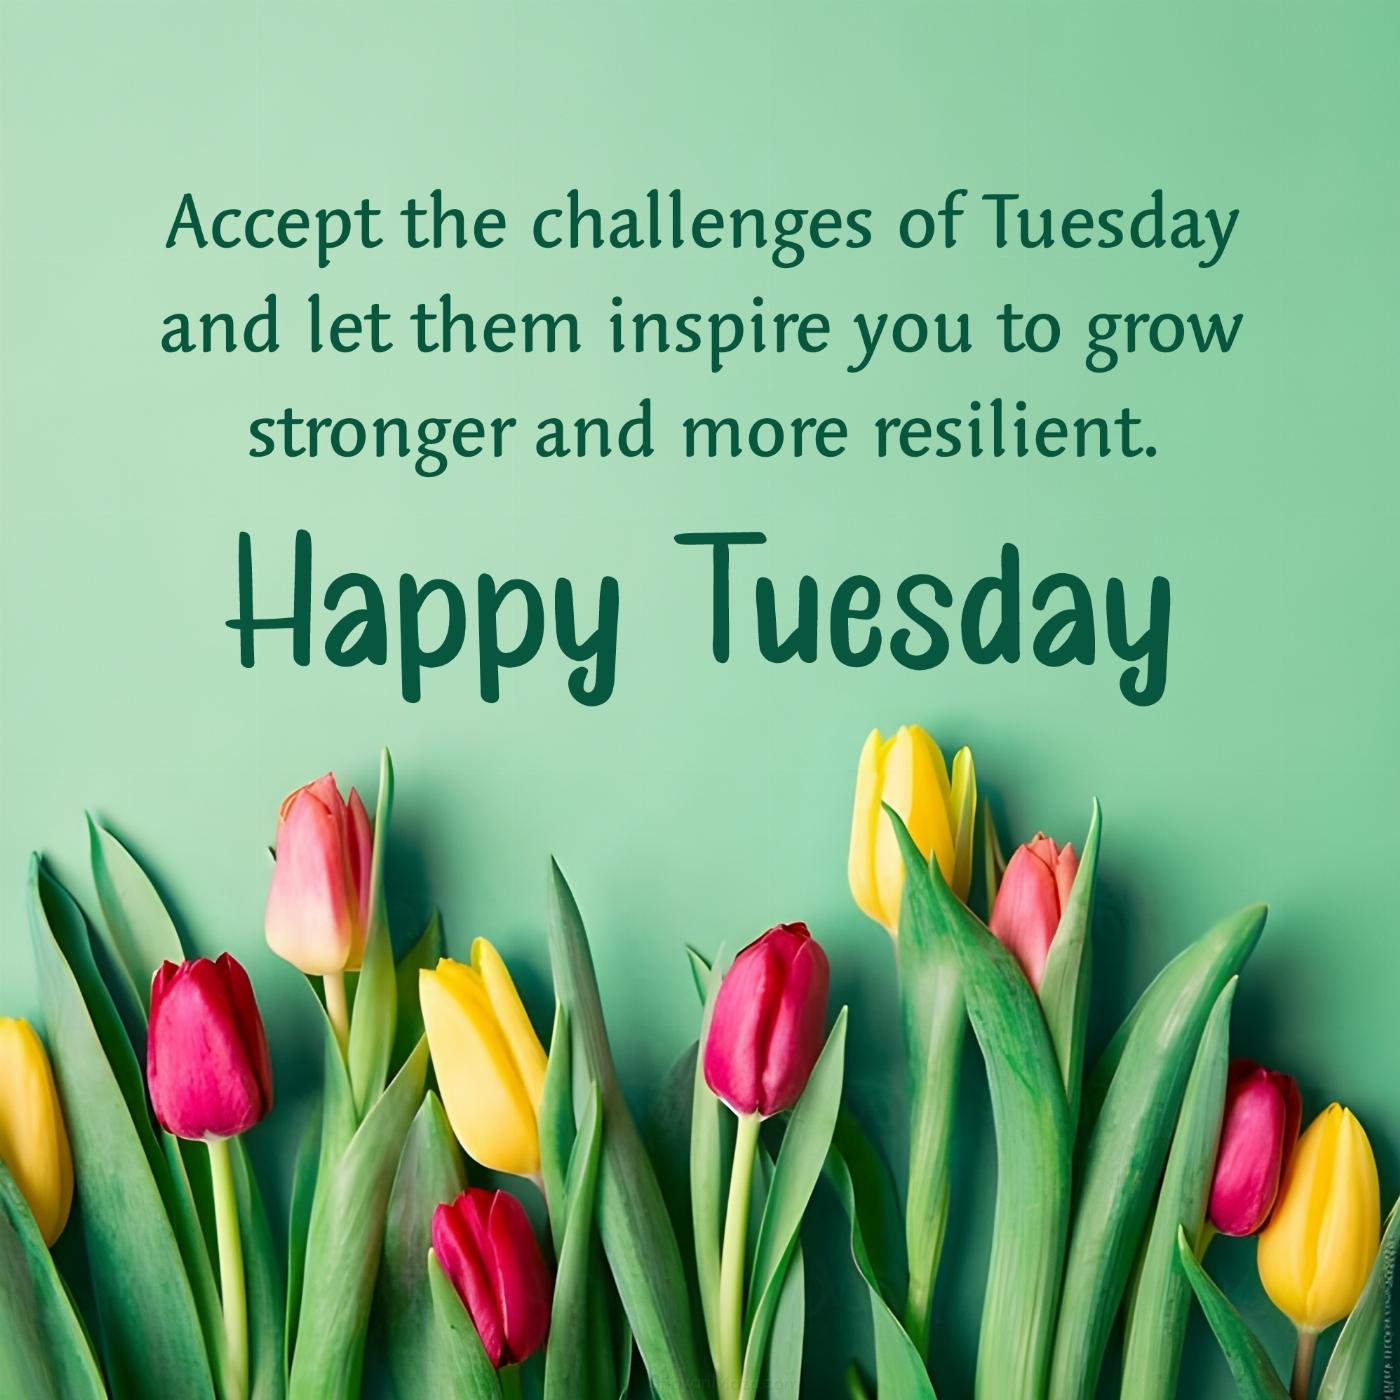 Accept the challenges of Tuesday and let them inspire you to grow